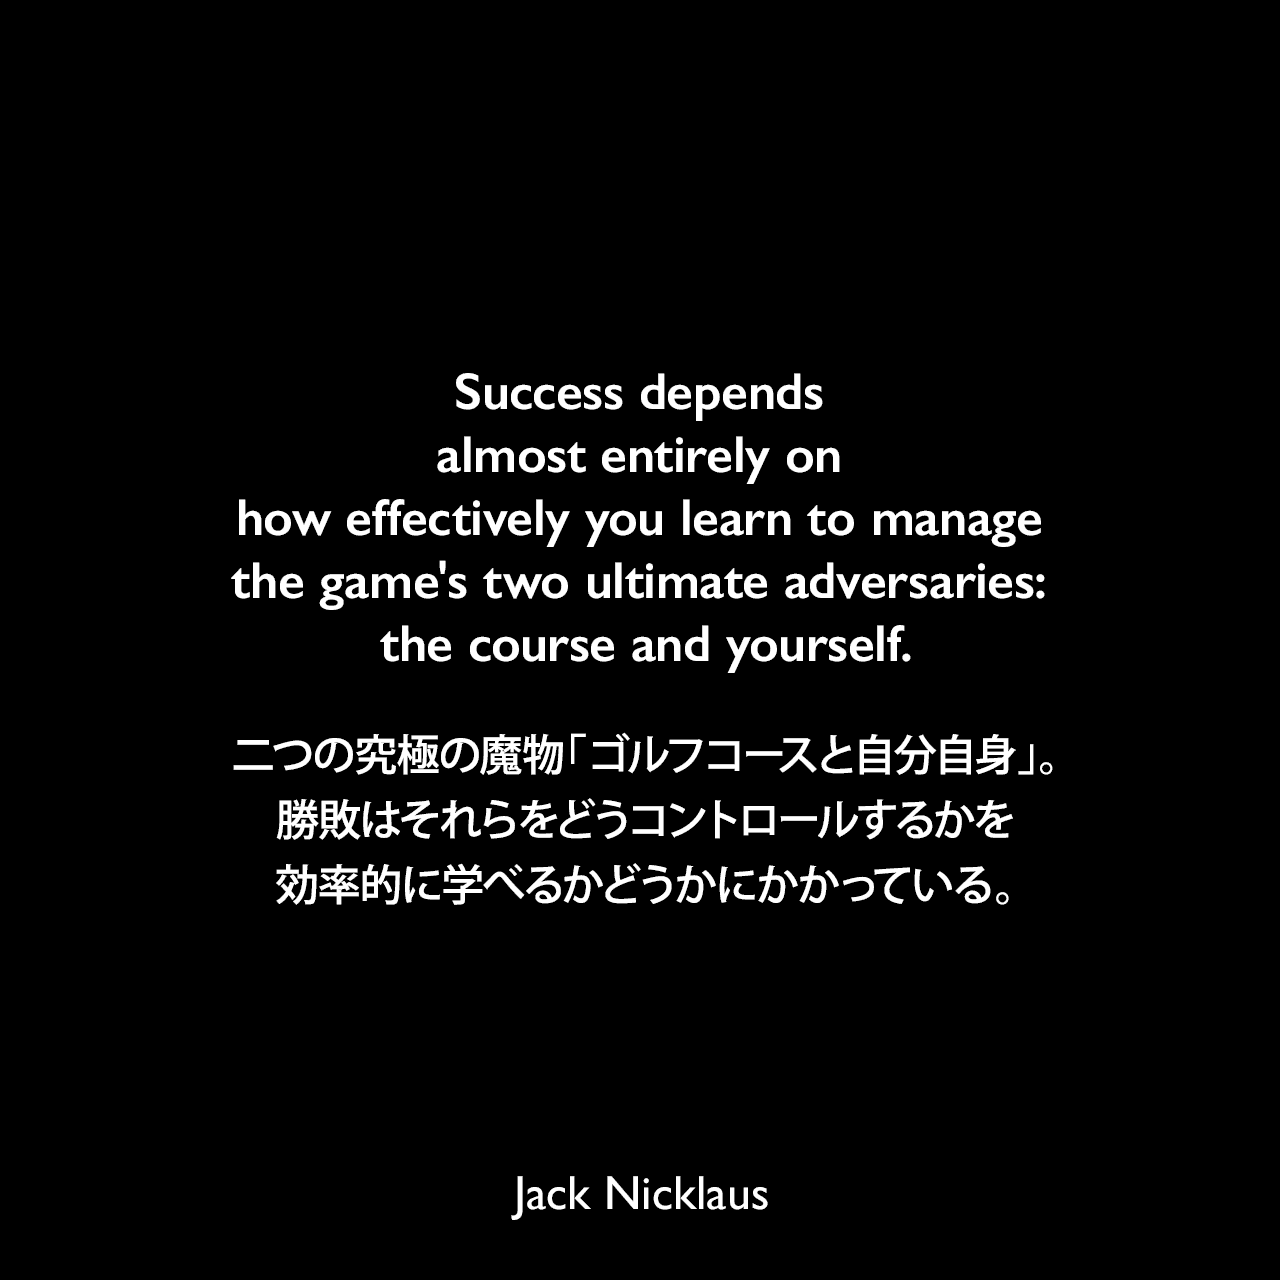 Success depends almost entirely on how effectively you learn to manage the game's two ultimate adversaries: the course and yourself.二つの究極の魔物「ゴルフコースと自分自身」。勝敗はそれらをどうコントロールするかを効率的に学べるかどうかにかかっている。Jack Nicklaus